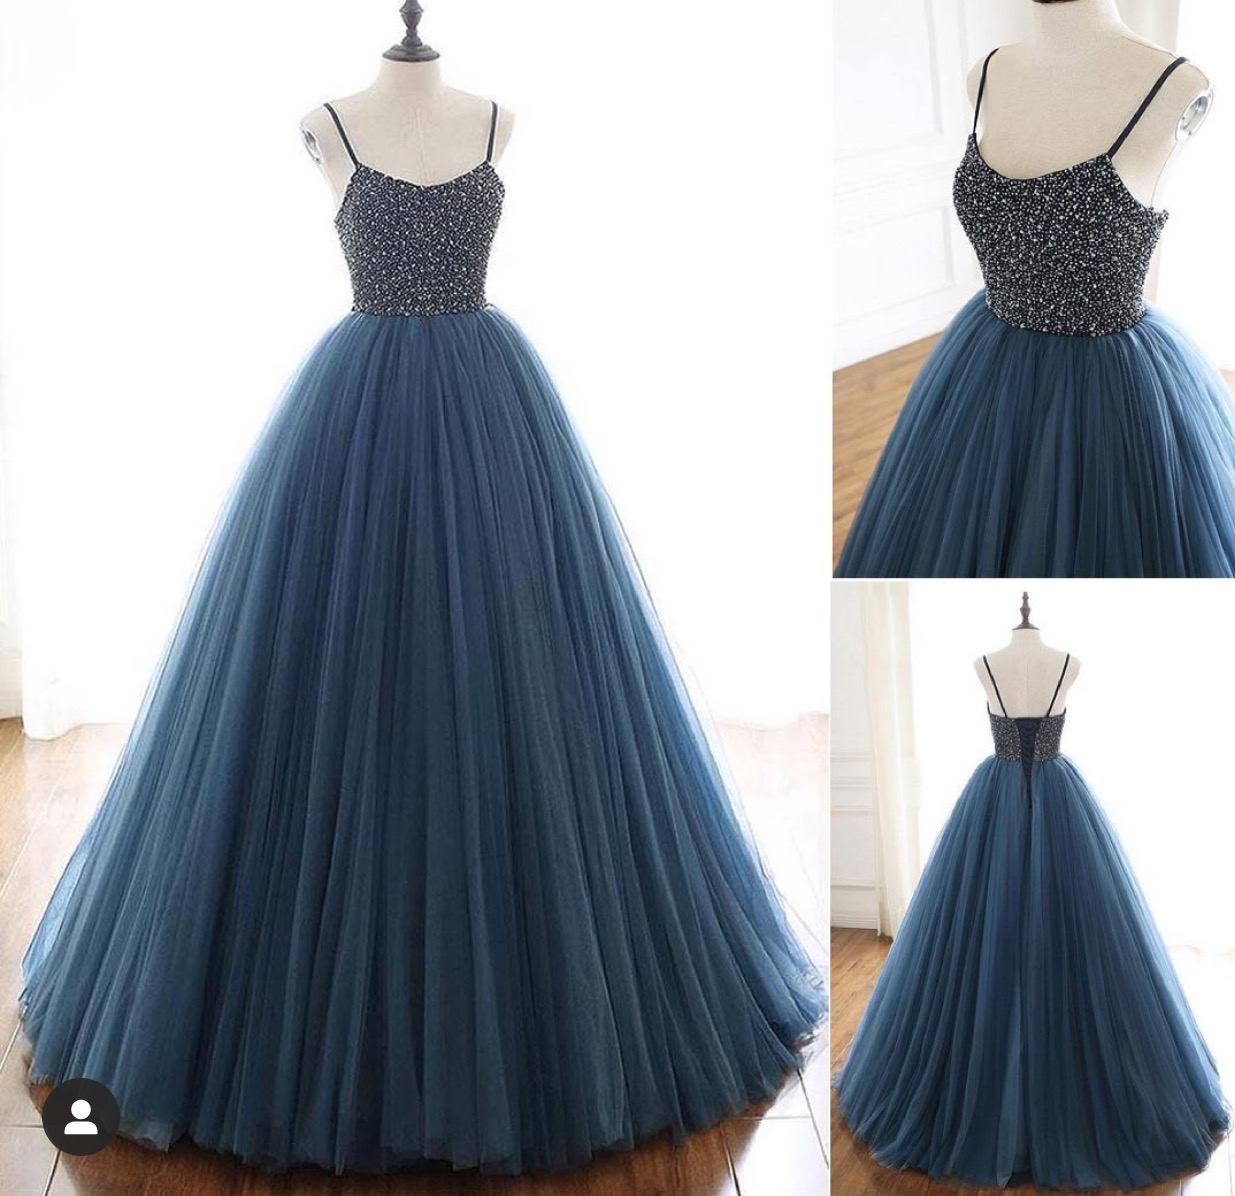 Boat Neck Prom Dress, Vintage Prom Dress, Prom Ball Gown, Pageant Dresses For Women, Beaded Prom Dresses, 2023 Prom Dresses, Robe De Soiree,